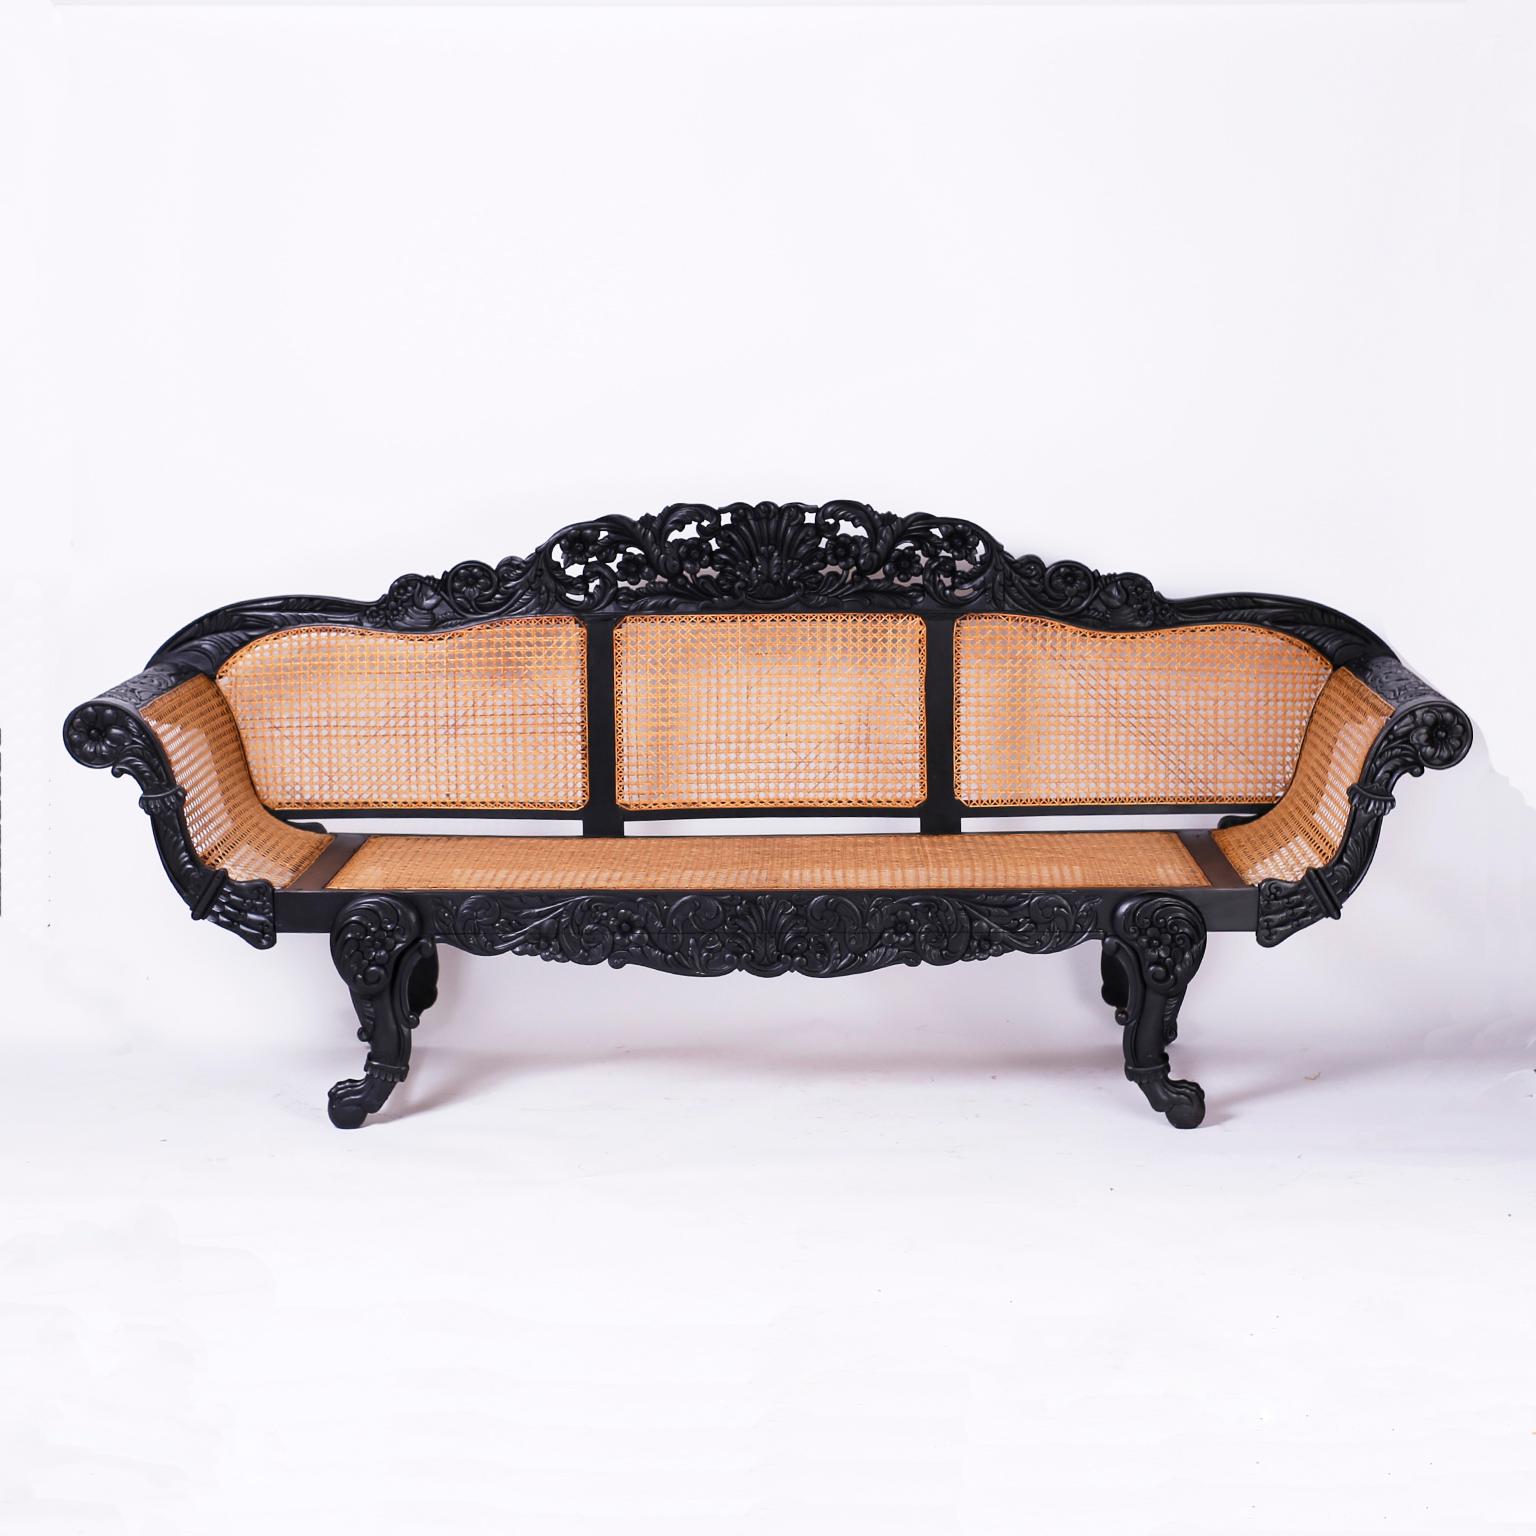 British colonial settee crafted in mahogany with an ebonized finish. Featuring an elaborately carved floral crest with center sea shell, hand caned seat and back, floral carved arms and skirt, dramatic form and claw and ball feet.